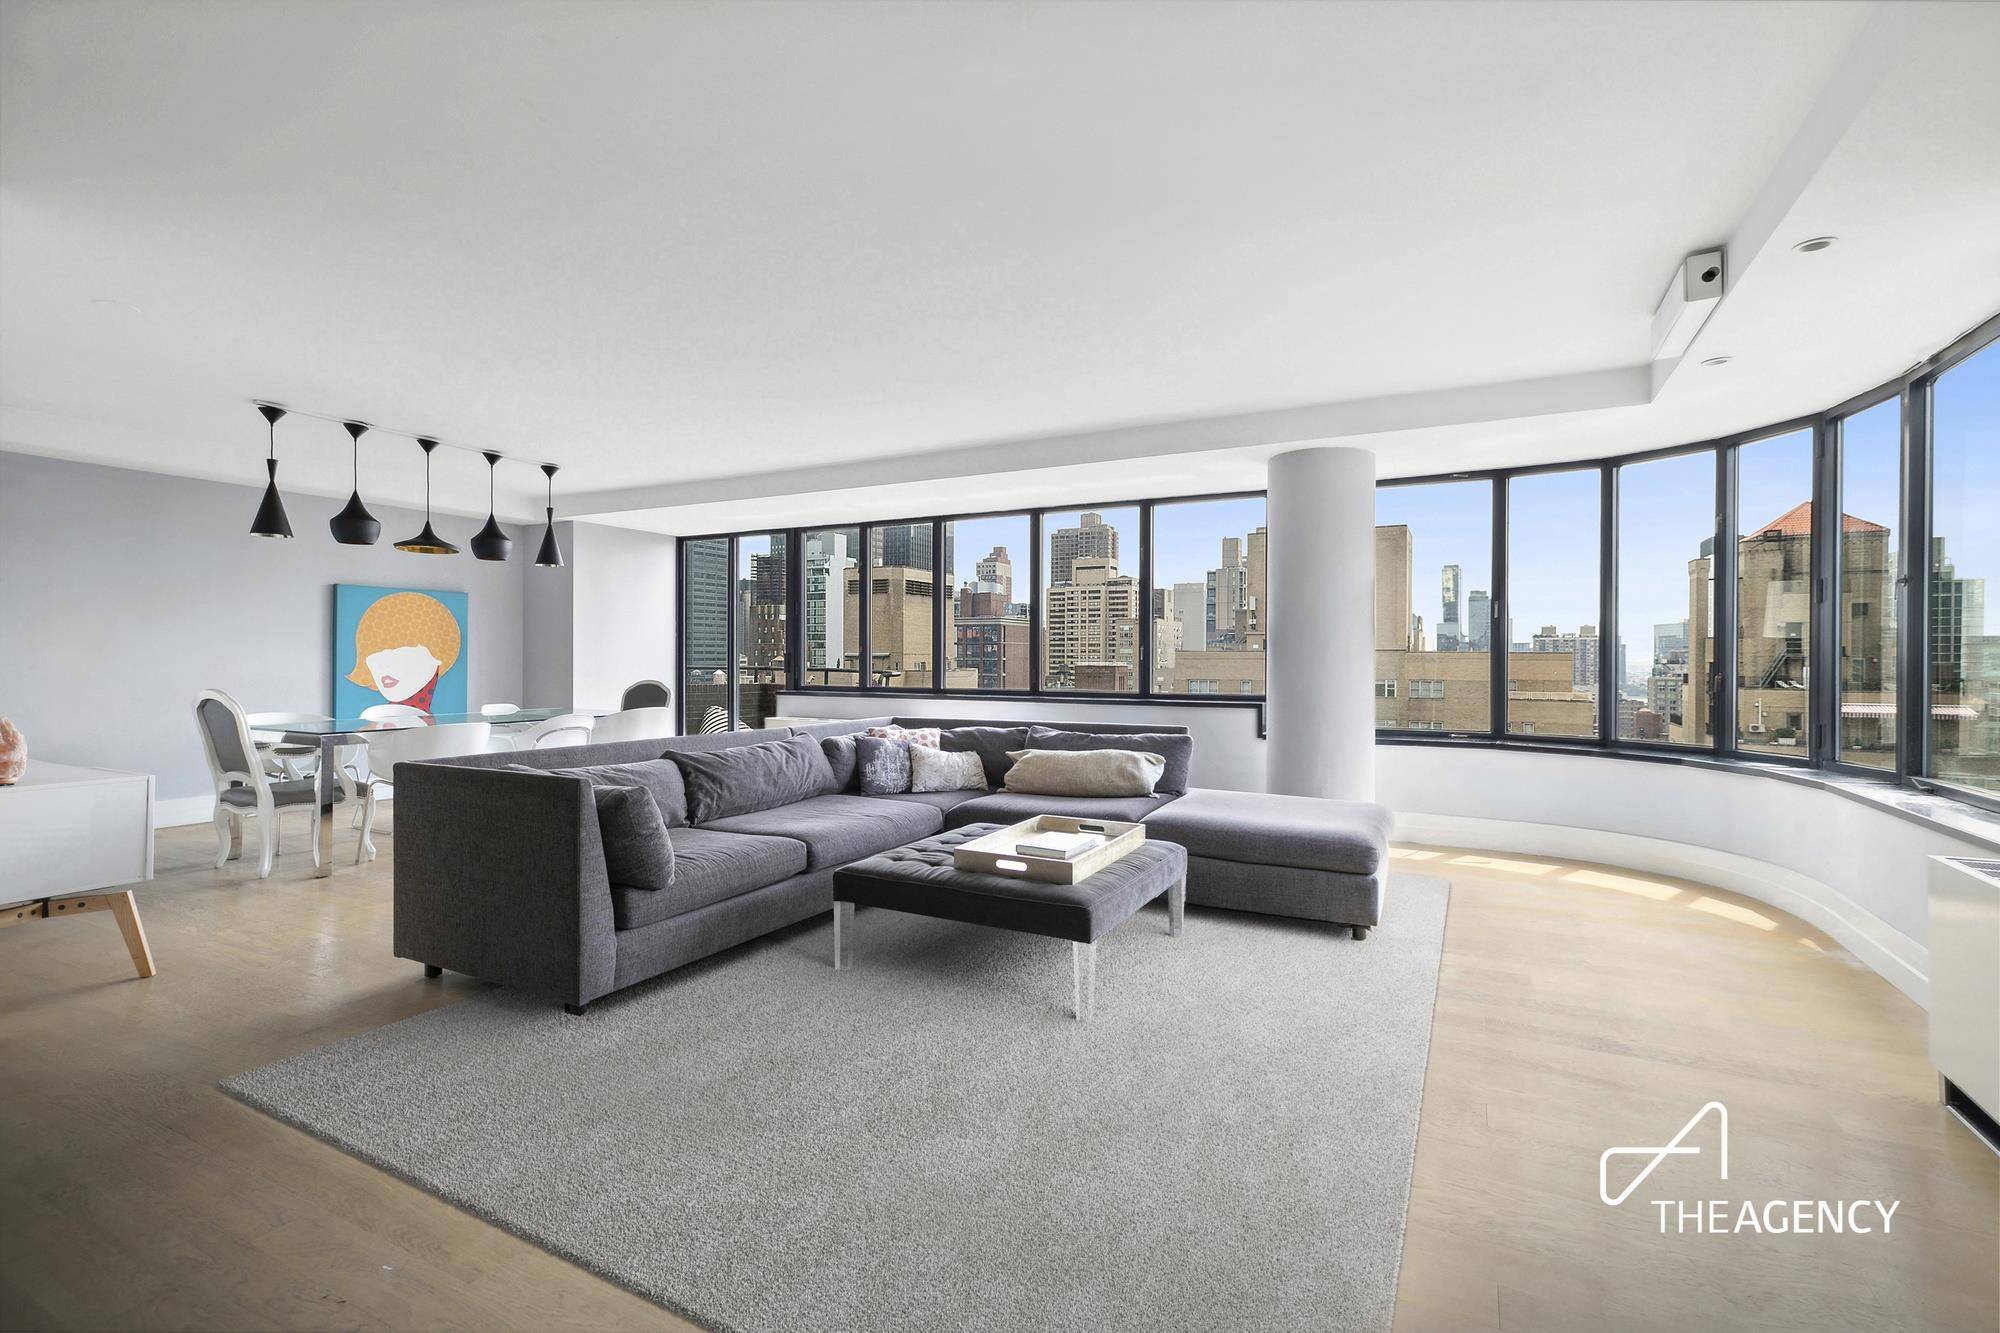 Luxurious 2 Story Condo with Panoramic Views in Midtown Manhattan Prepare to be amazed by this unique 2 story condo, offering mesmerizing panoramic views and a private balcony.